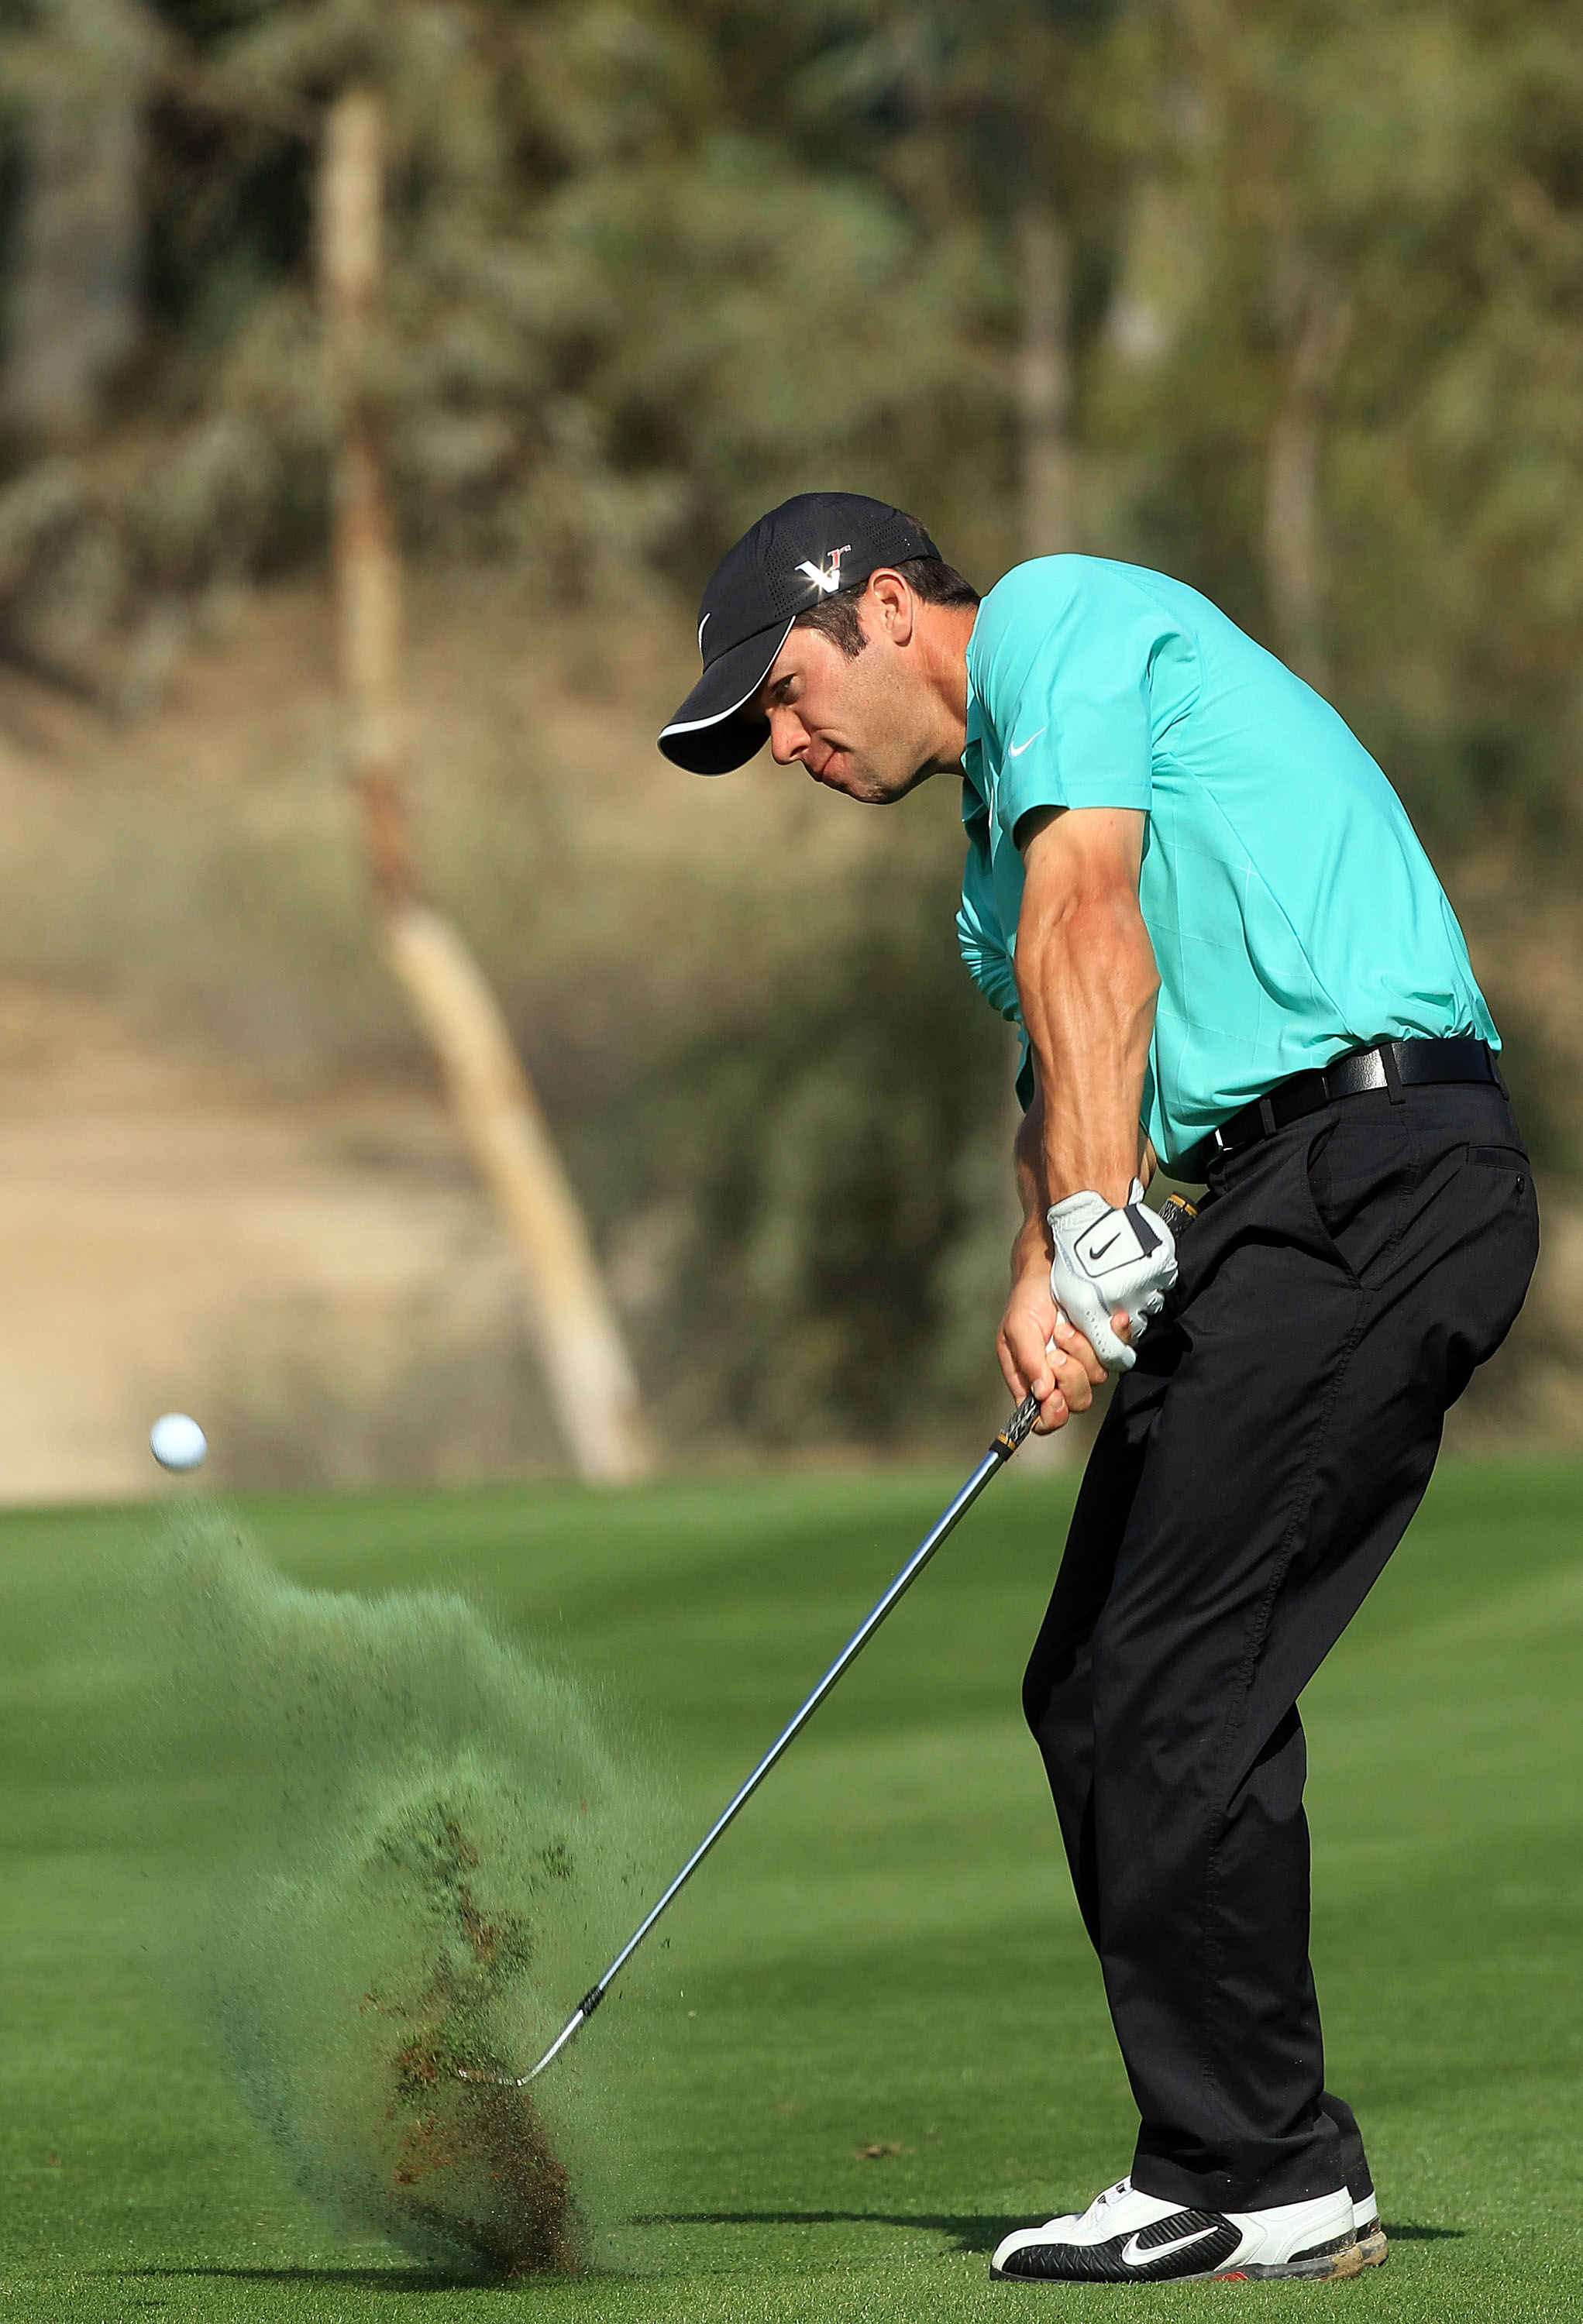 DUBAI, UNITED ARAB EMIRATES - FEBRUARY 03:  Paul Casey of England plays out of a divot at the 17th hole during the pro-am as a preview for the 2010 Omega Dubai Desert Classic on the Majilis Course at the Emirates Golf Club on February 3, 2010 in Dubai, Un